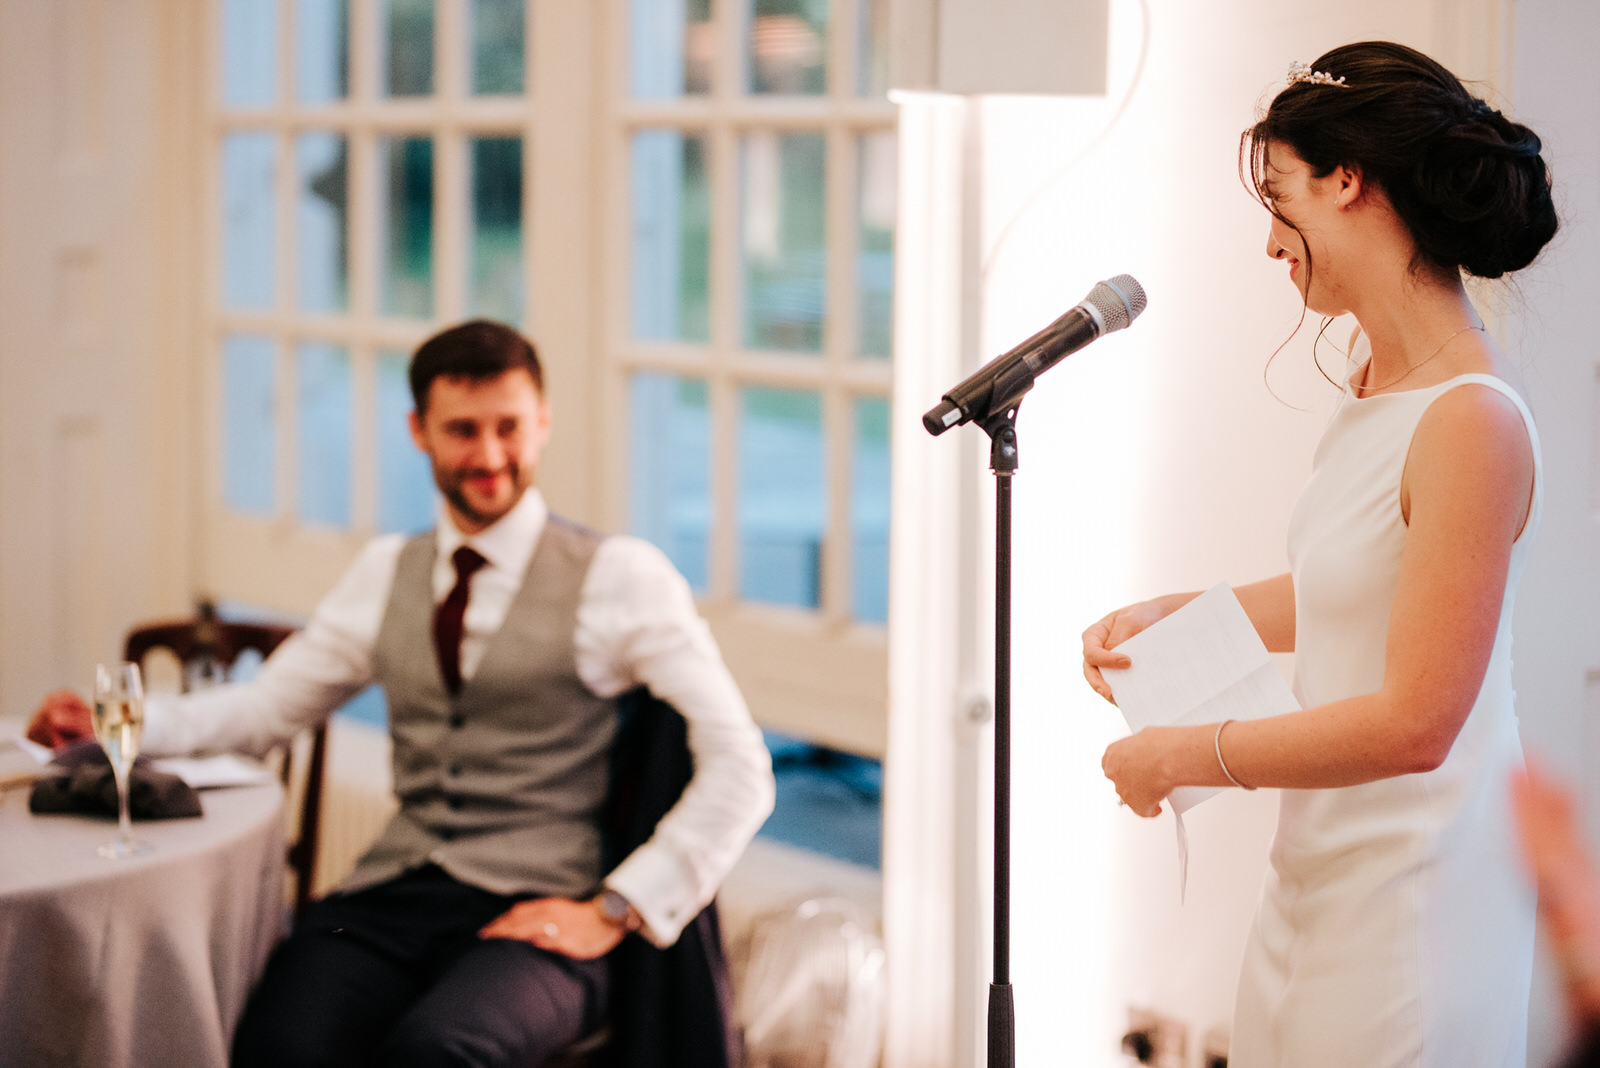  Bride finishes her speech and looks emotionally at groom 